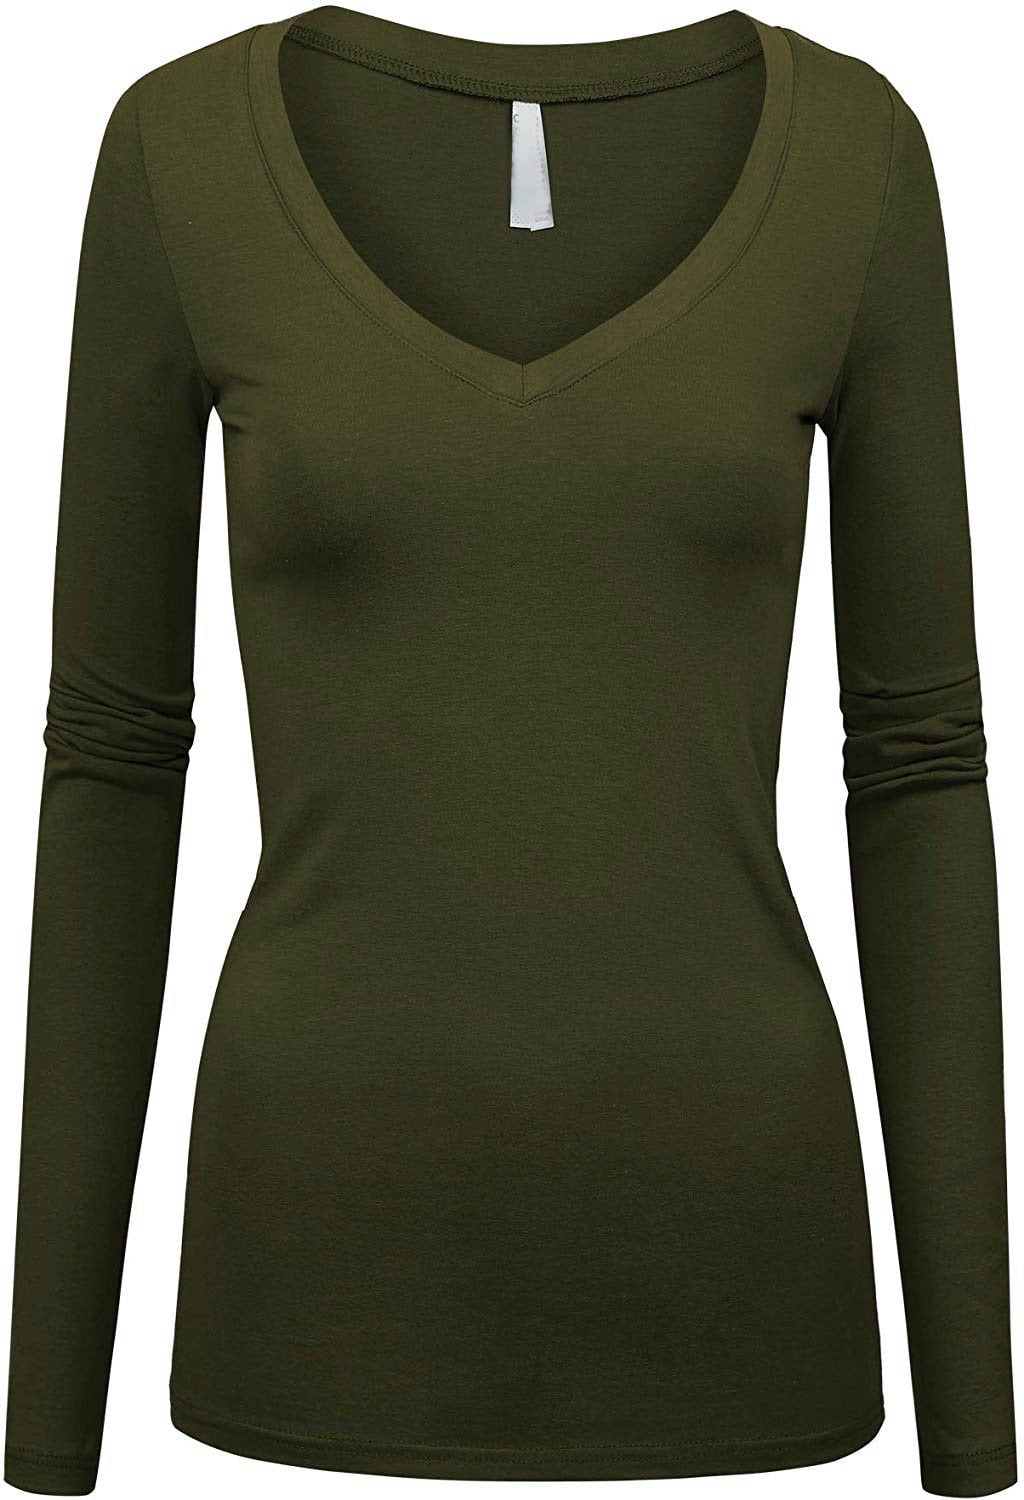 Kaylee_xo Women's Long Sleeve V-Neck Low-cut Sexy Solid Stretchy Shirt Top